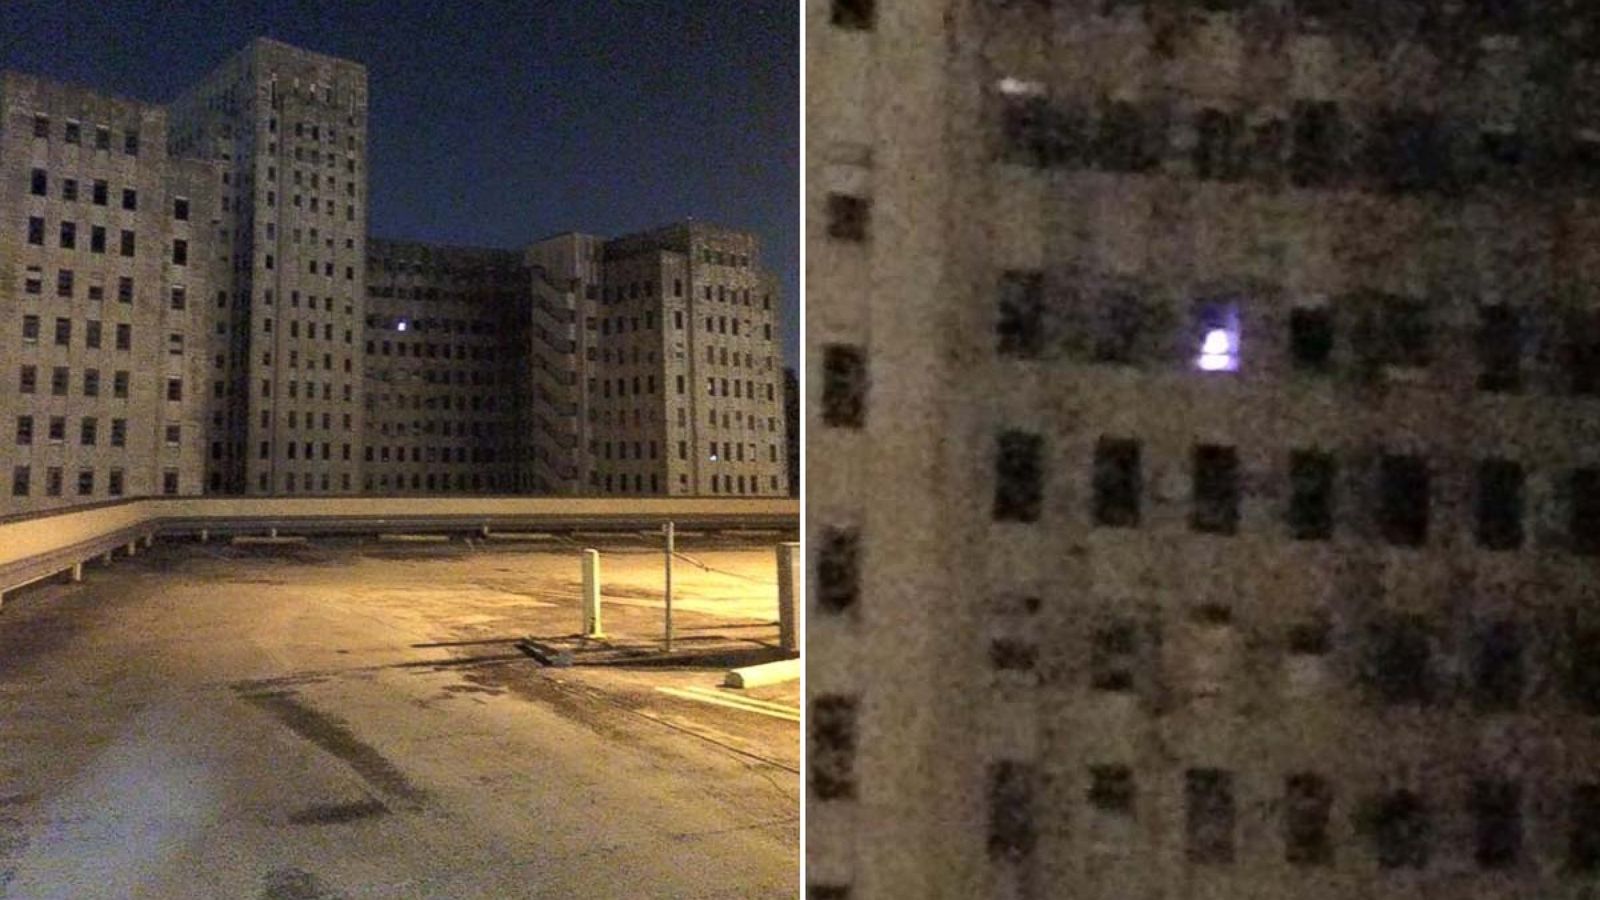 Mystery Of Creepy Light Spotted In Window Of Abandoned New Orleans Hospital Solved Abc News